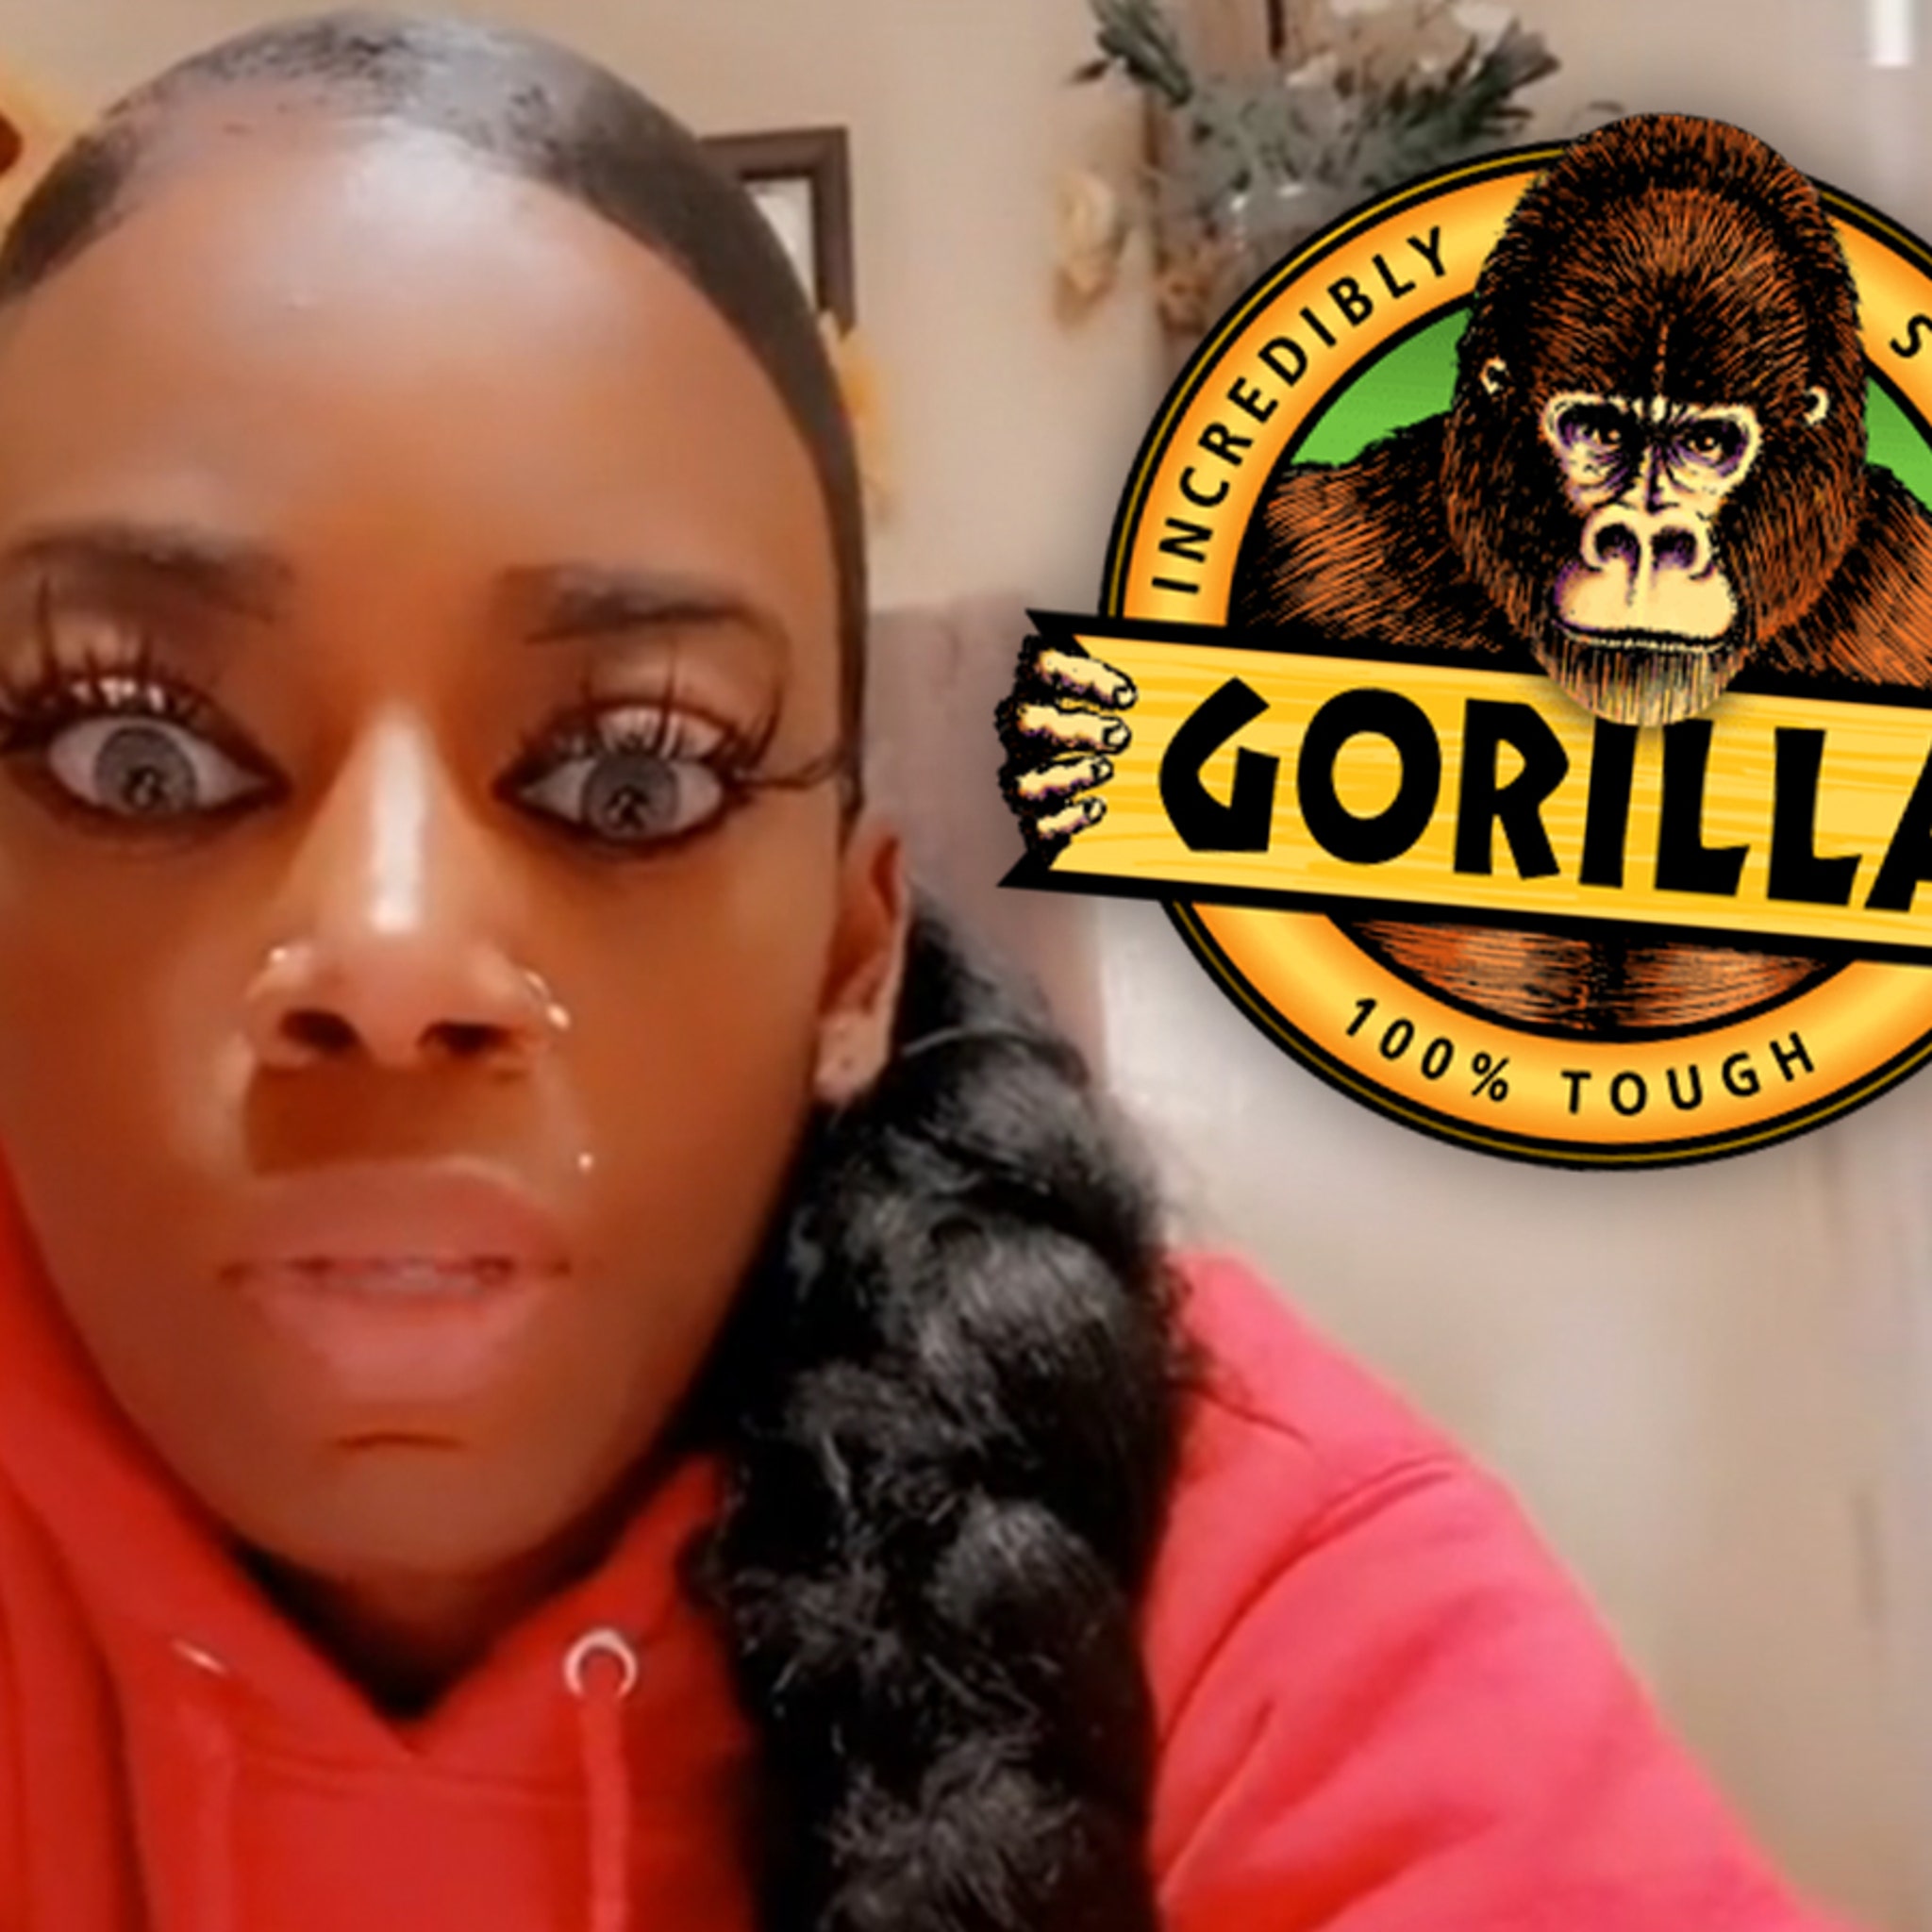 Woman Who Put Gorilla Glue in Hair Gets No Relief at ER, Might Sue